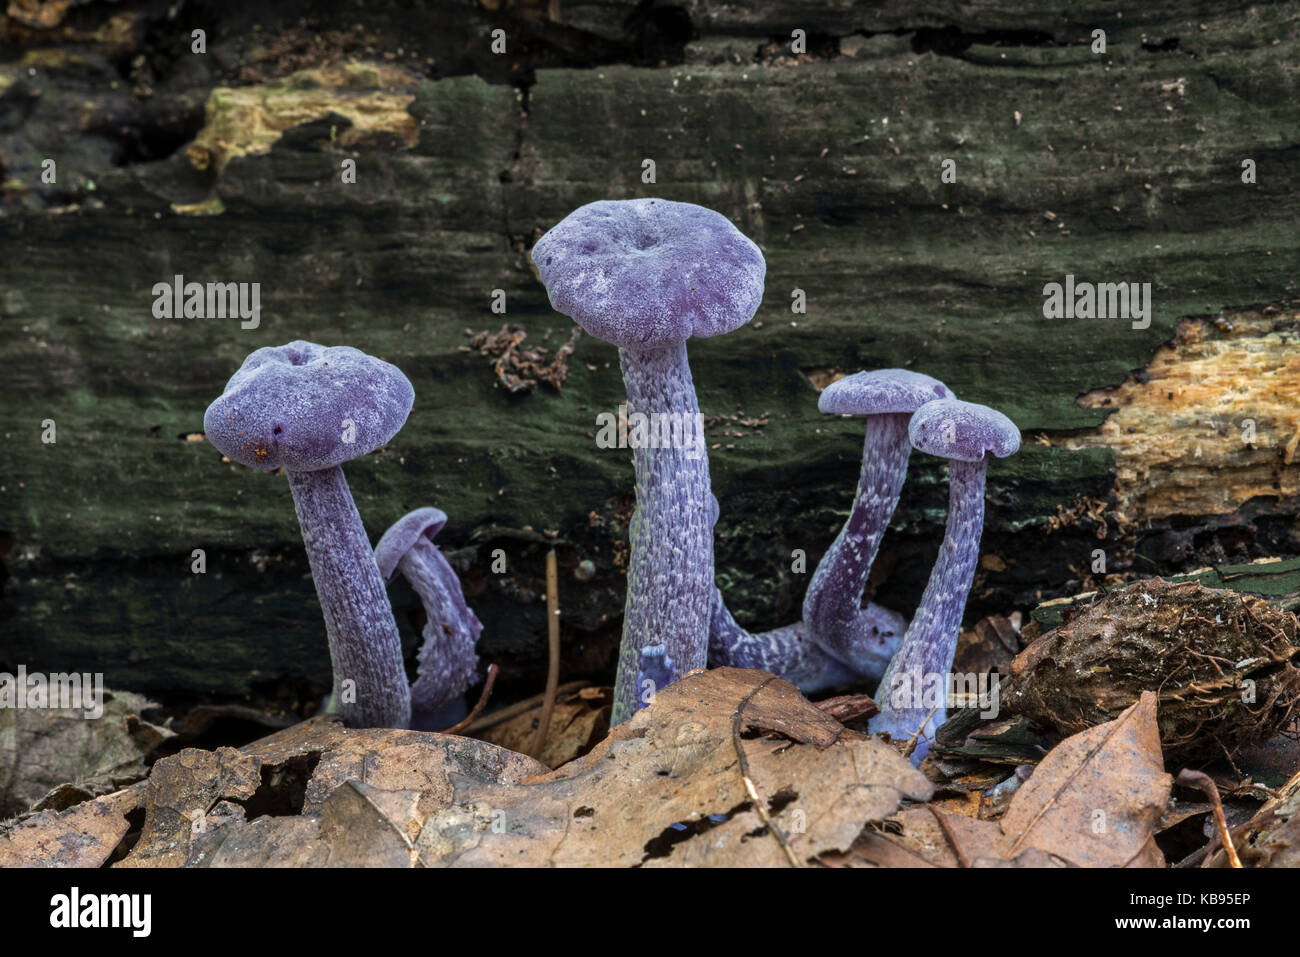 Amethyst deceiver (Laccaria amethystina) mushrooms in autumn forest Stock Photo